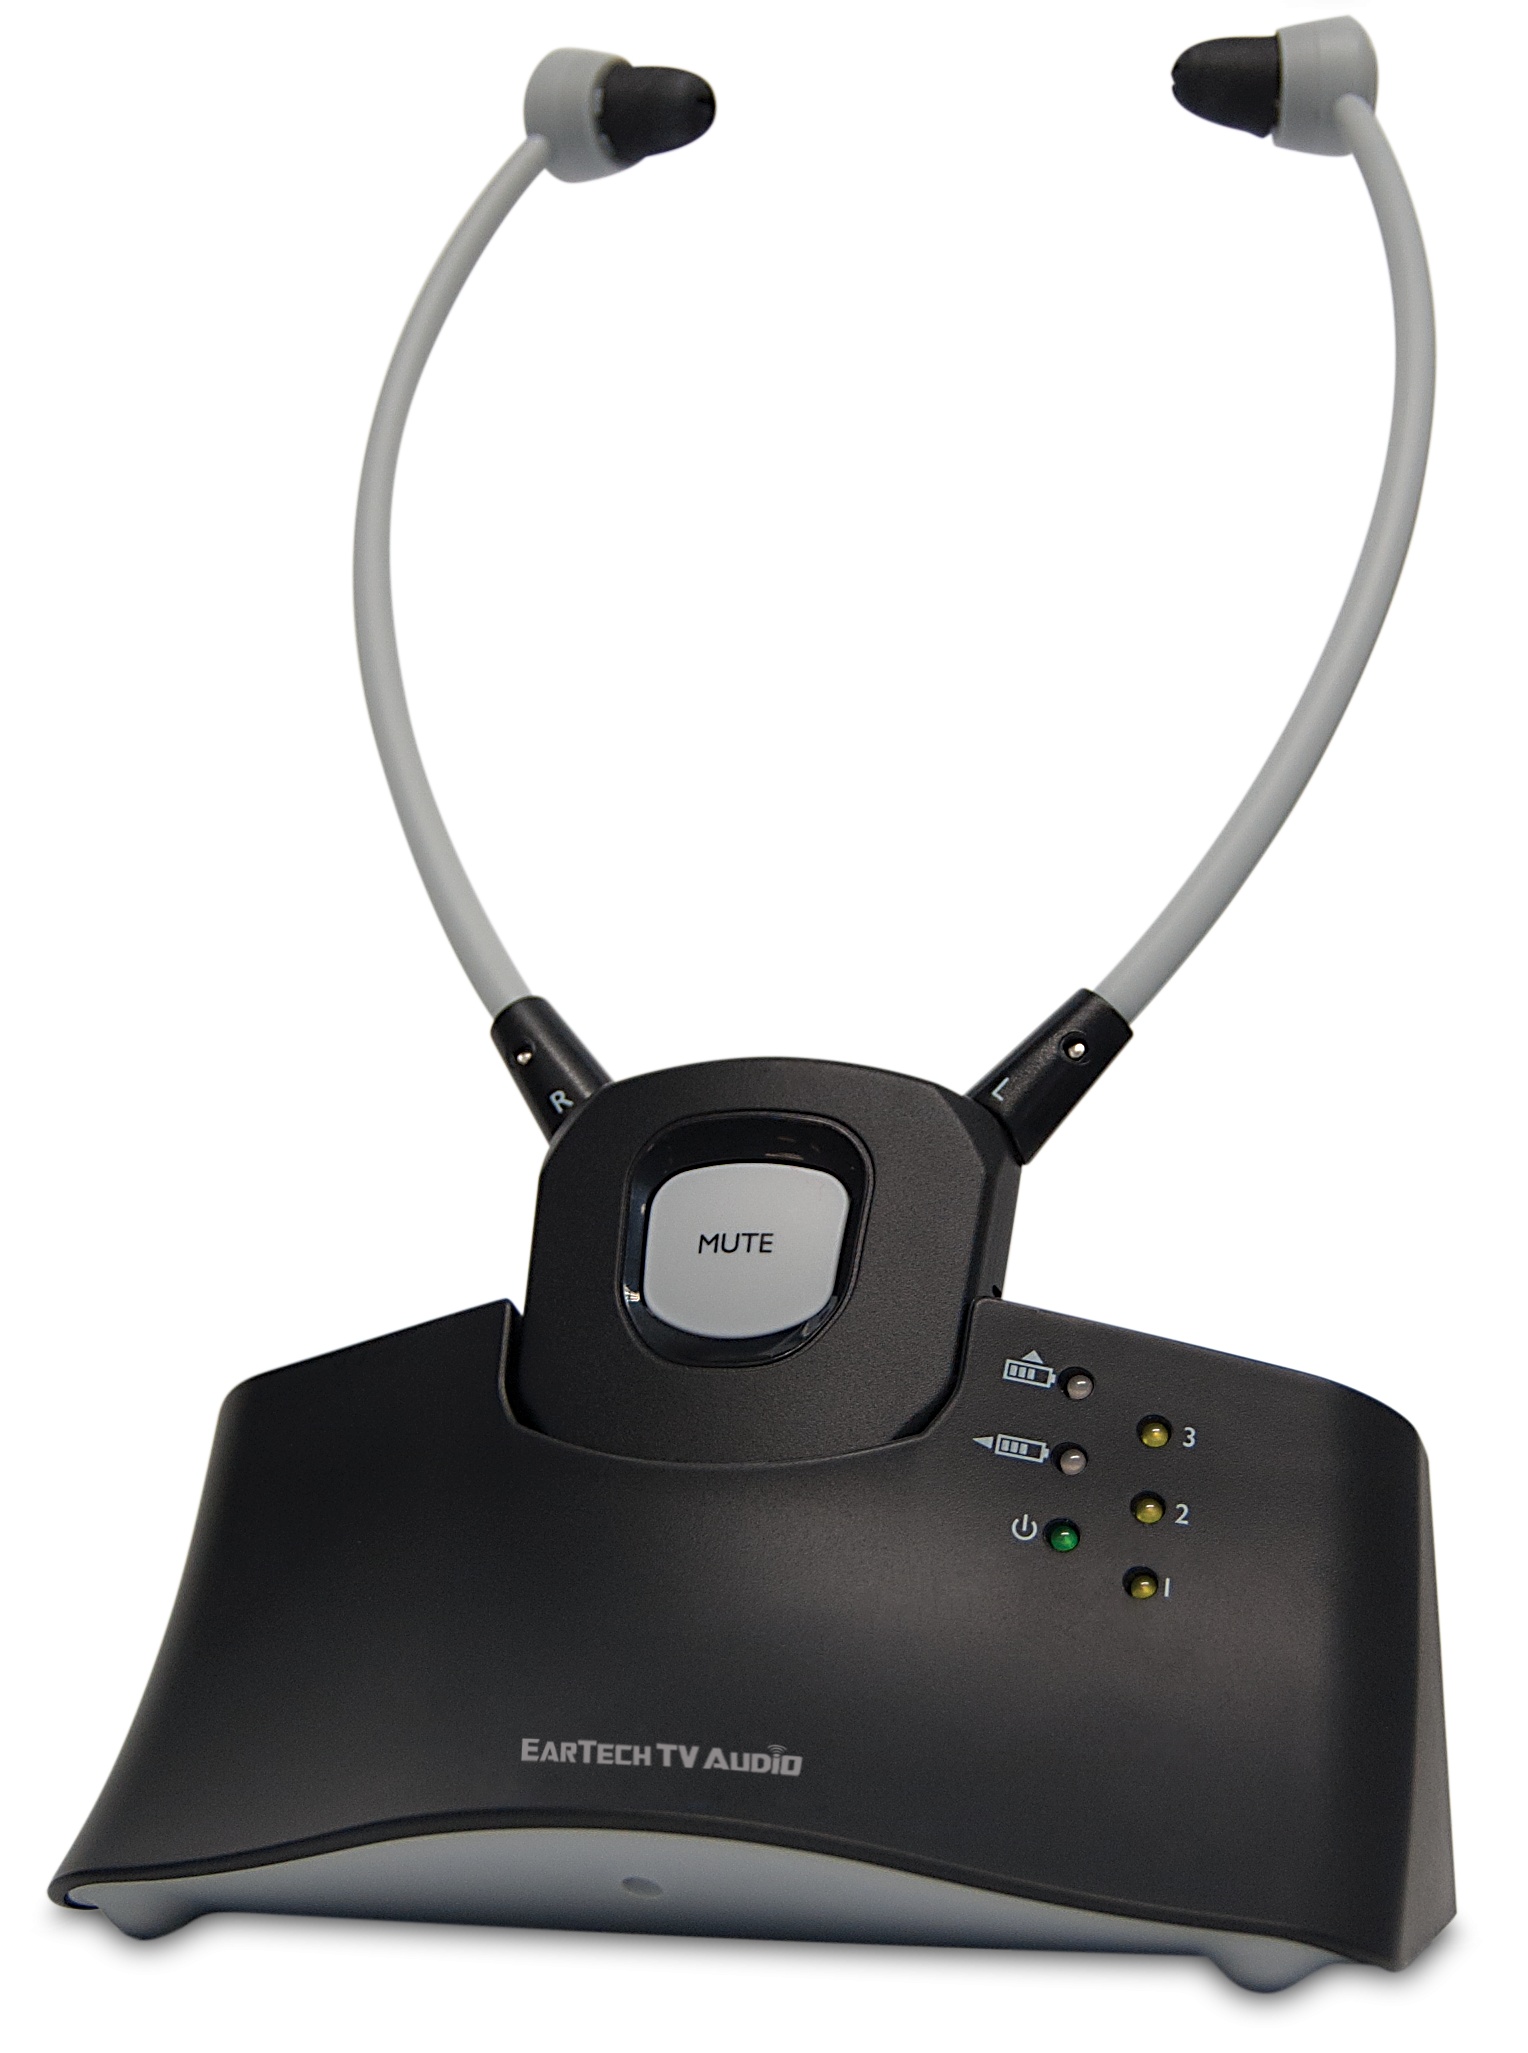 Eartech TV Audio Digital RF TV Listening System with Headset